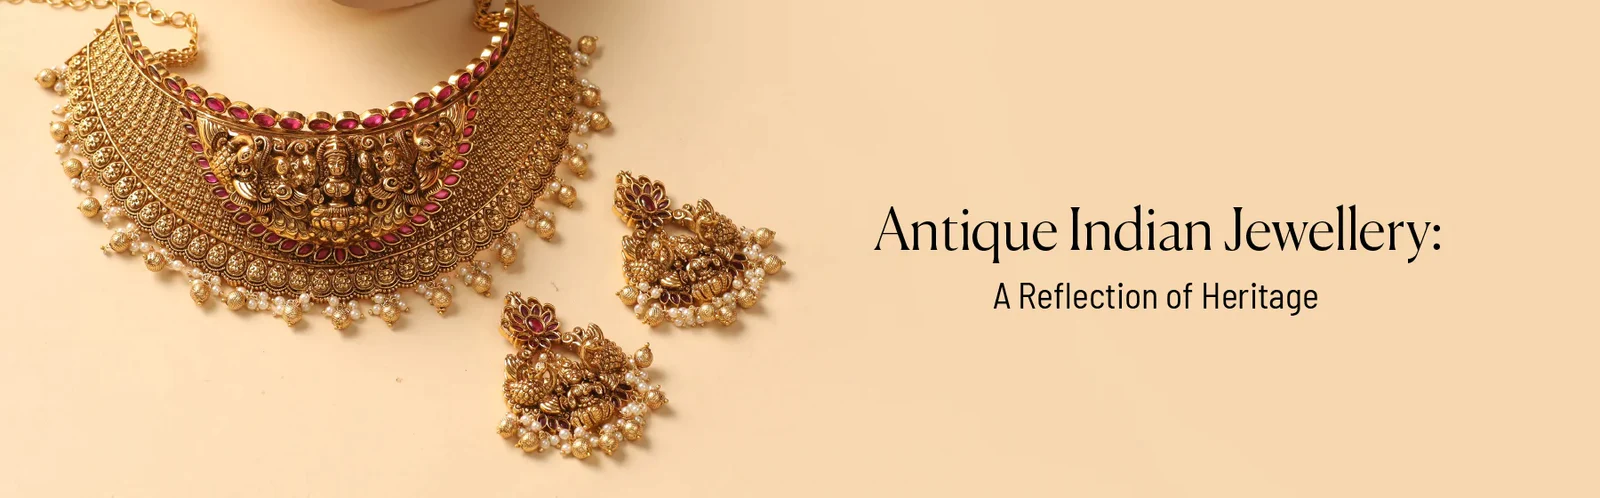 payment-gateway-for-antique-jewelry-in-india